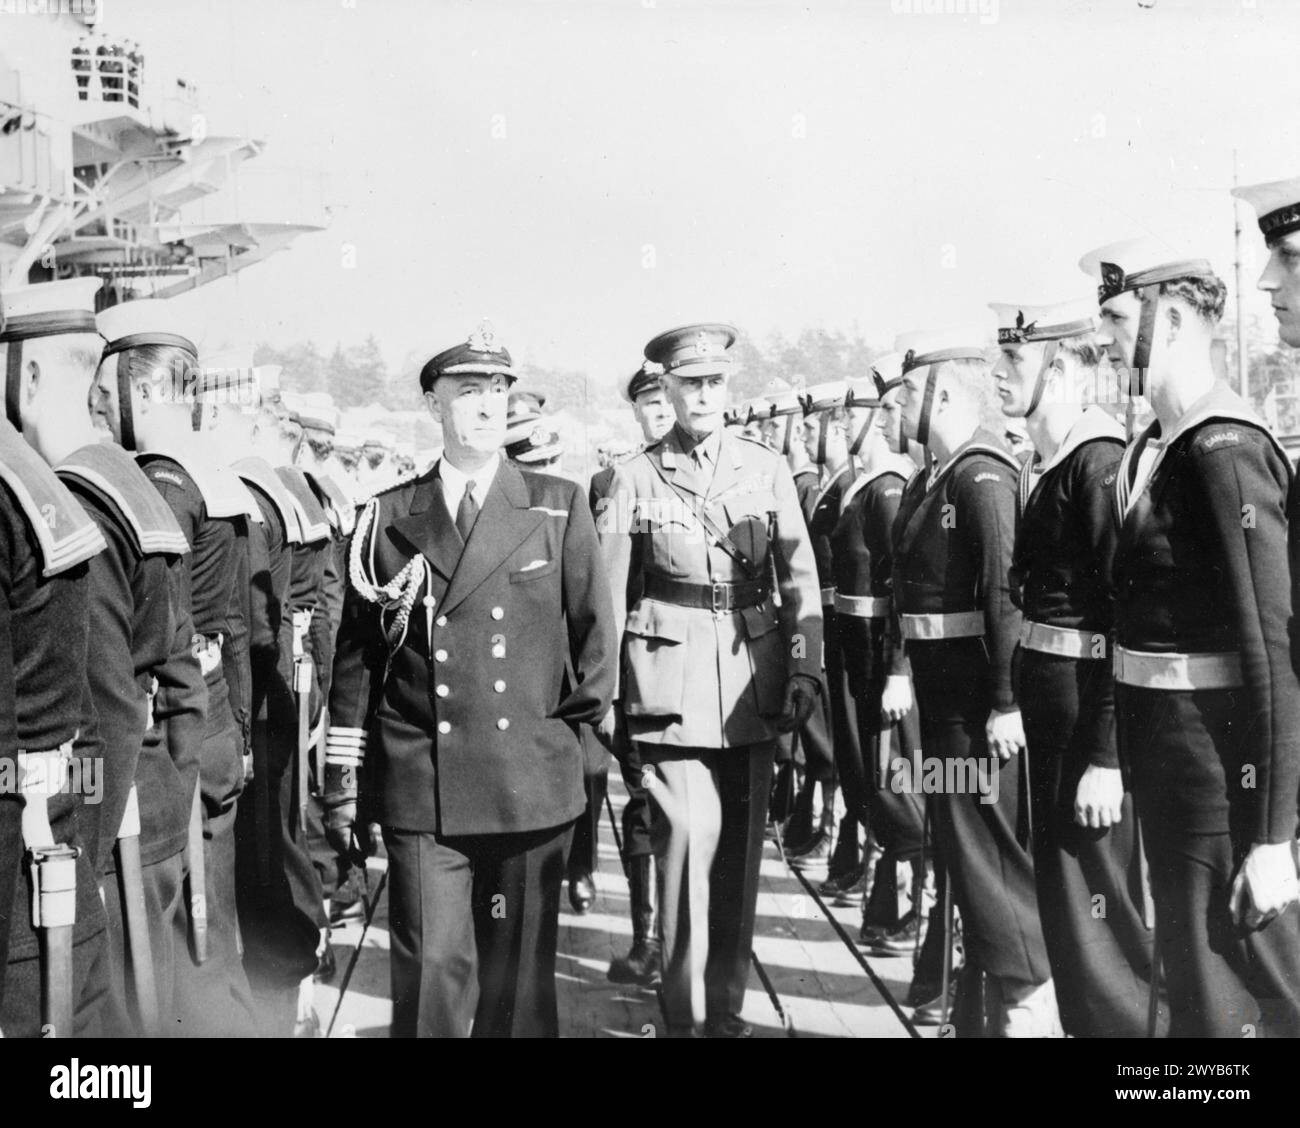 WITH THE SMITER. JUNE 1944, ON BOARD THE ESCORT CARRIER HMS SMITER, WHICH WAS VISITED BY THE GOVERNOR GENERAL OF CANADA, THE EARL OF ATHLONE, WHEN SHE CALLED AT THE CANADIAN PORT OF VANCOUVER. LATER THE SMITER RETURNED TO BRITAIN WITH A CONSIGNMENT OF AIRCRAFT FOR THE FLEET AIR ARM. - Governor General of Canada inspecting the Guard of Honour of Canadian ratings. , Stock Photo